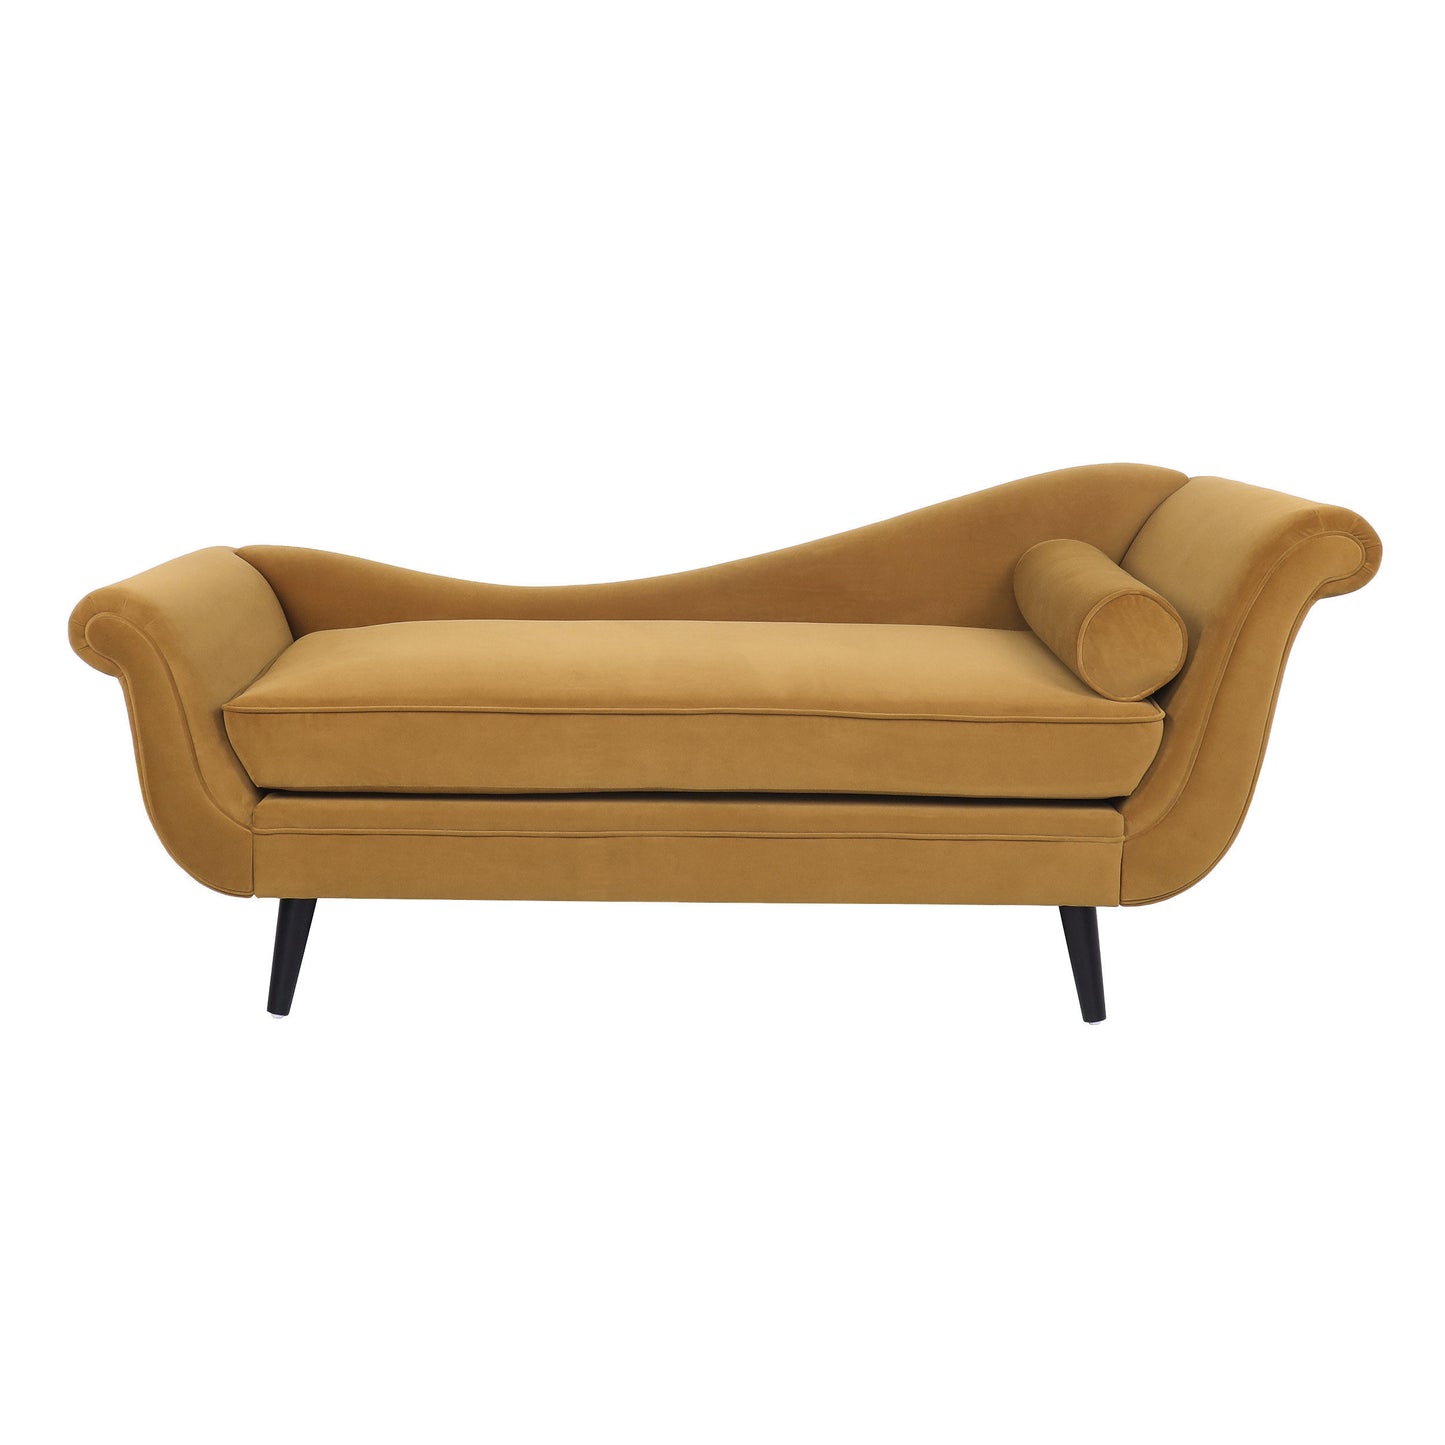 Jakyrah Contemporary Velvet Chaise Lounge with Scroll Arms